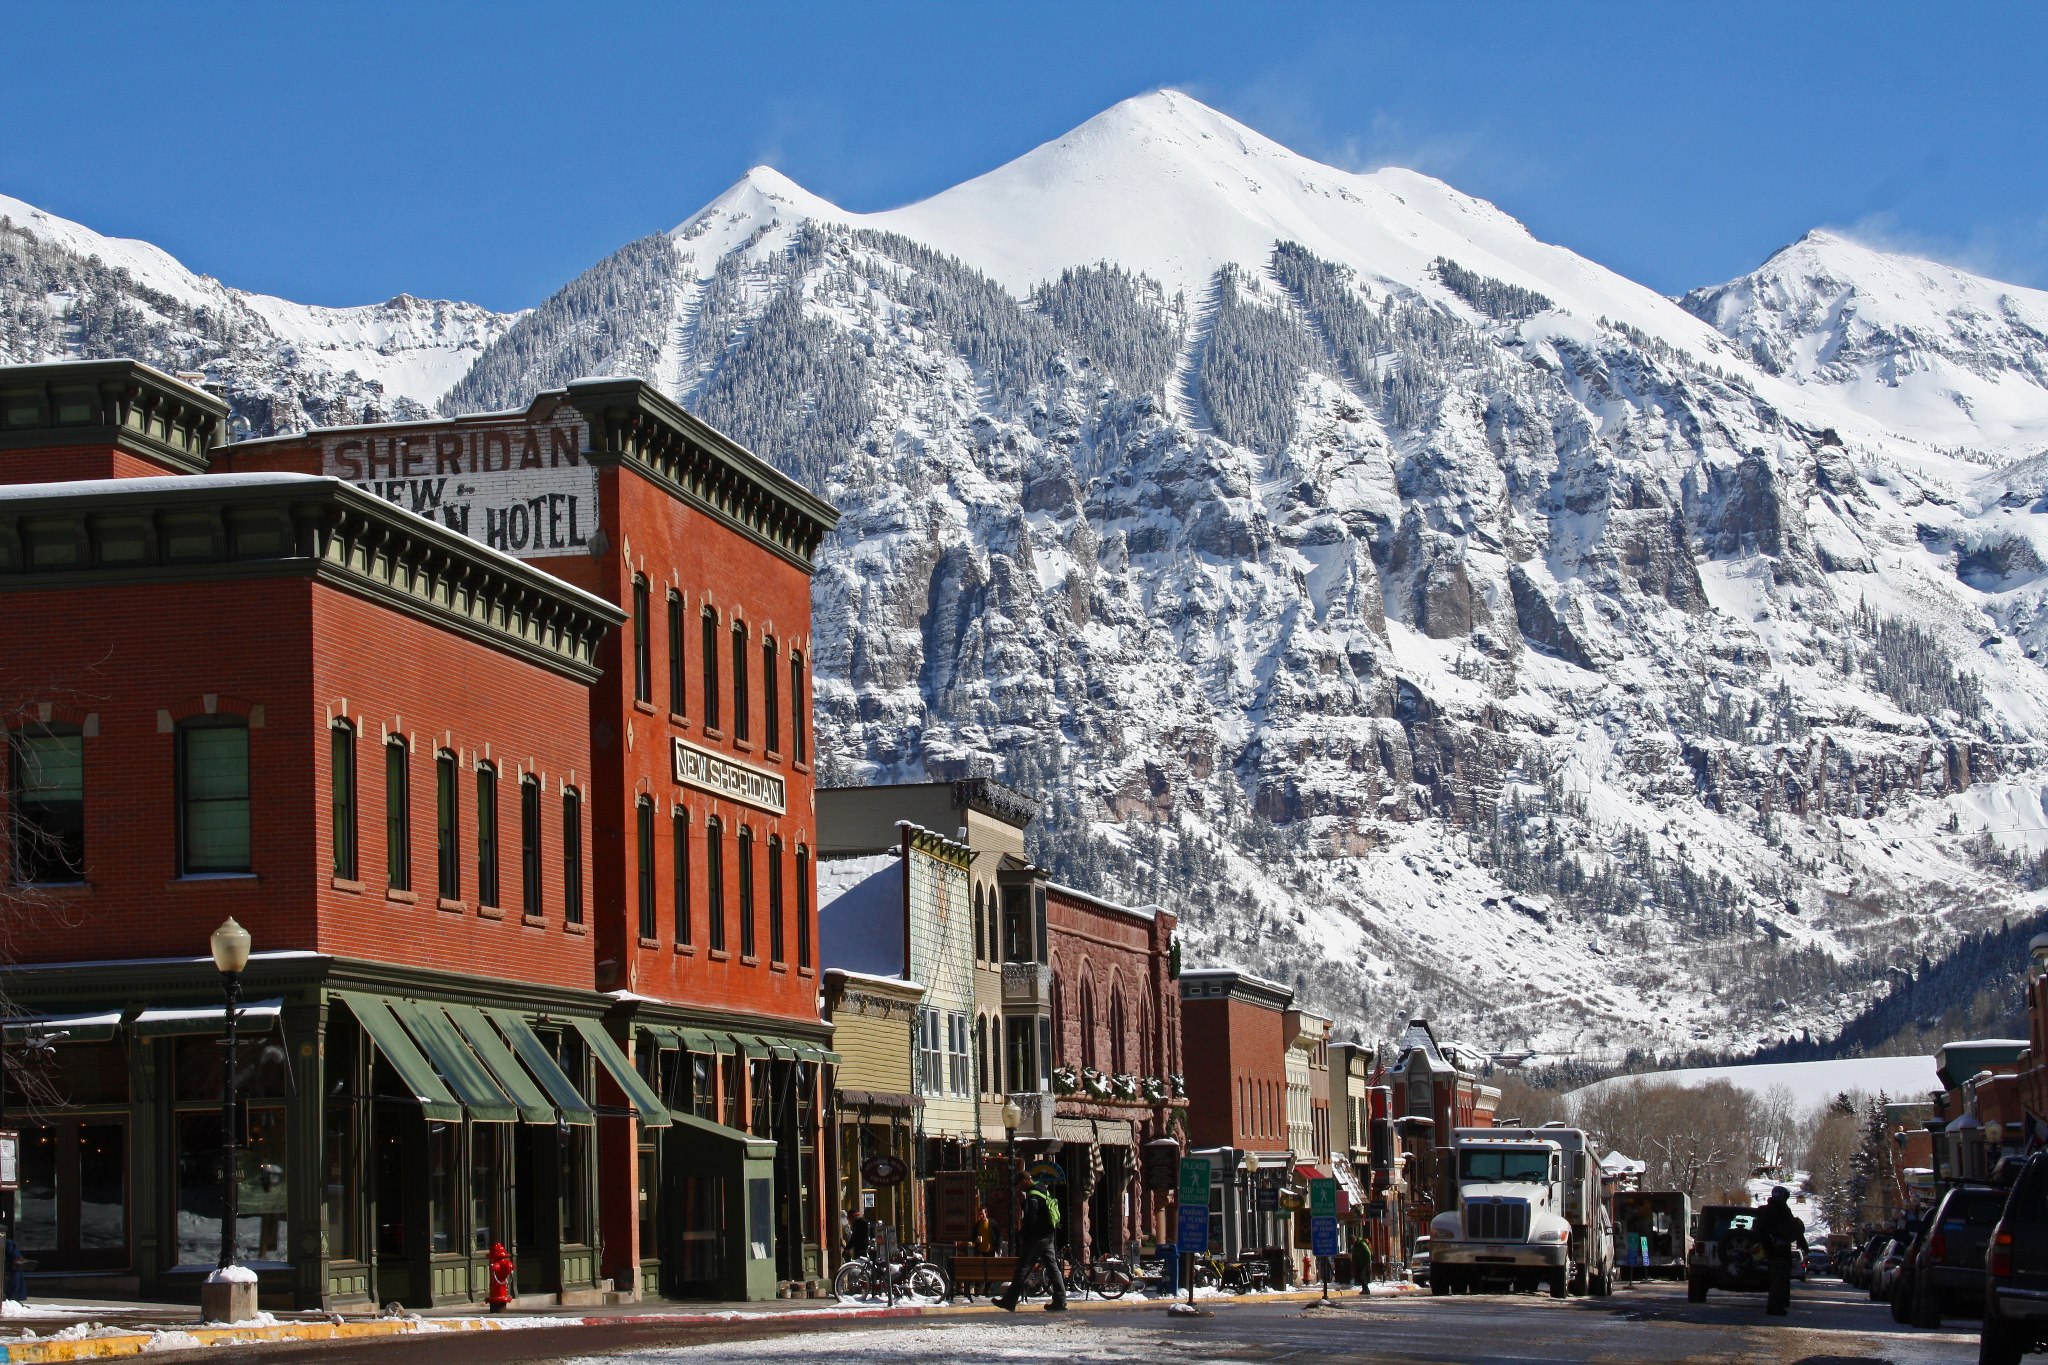 The 25 Best Small Towns to Visit in the USA How Many are Ski Towns?